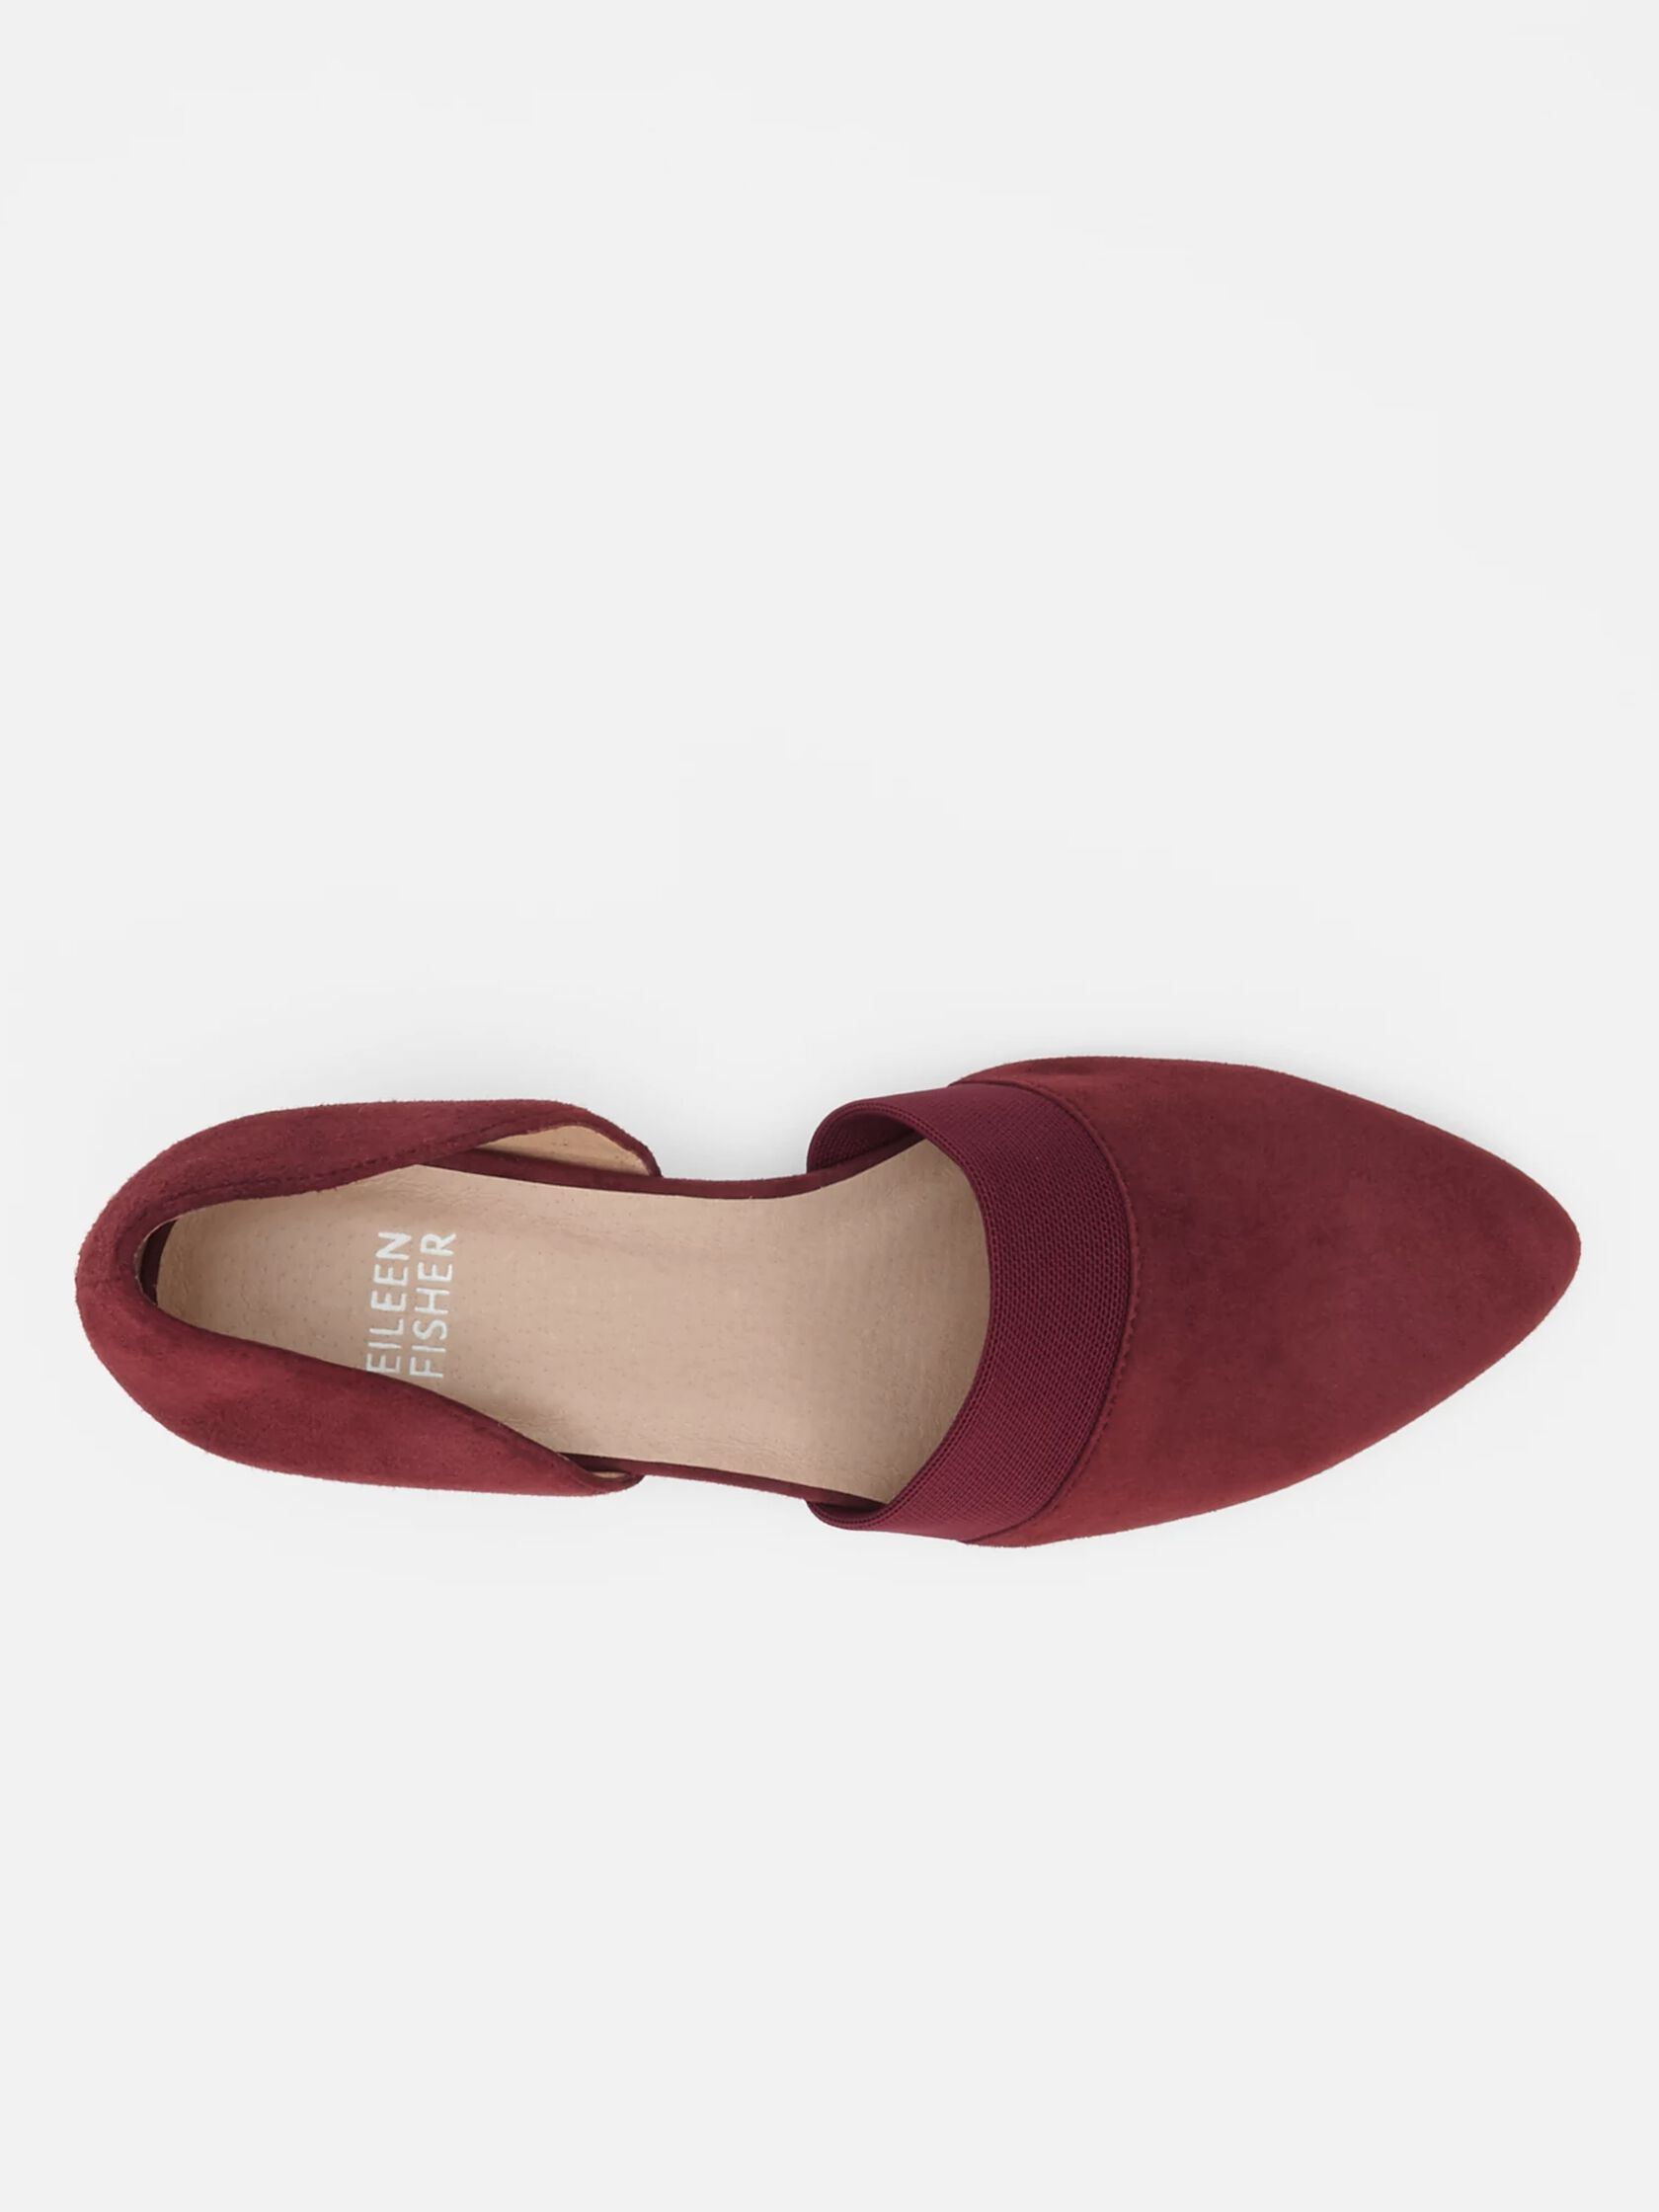 Hilly Suede d'Orsay Pump | EILEEN FISHER